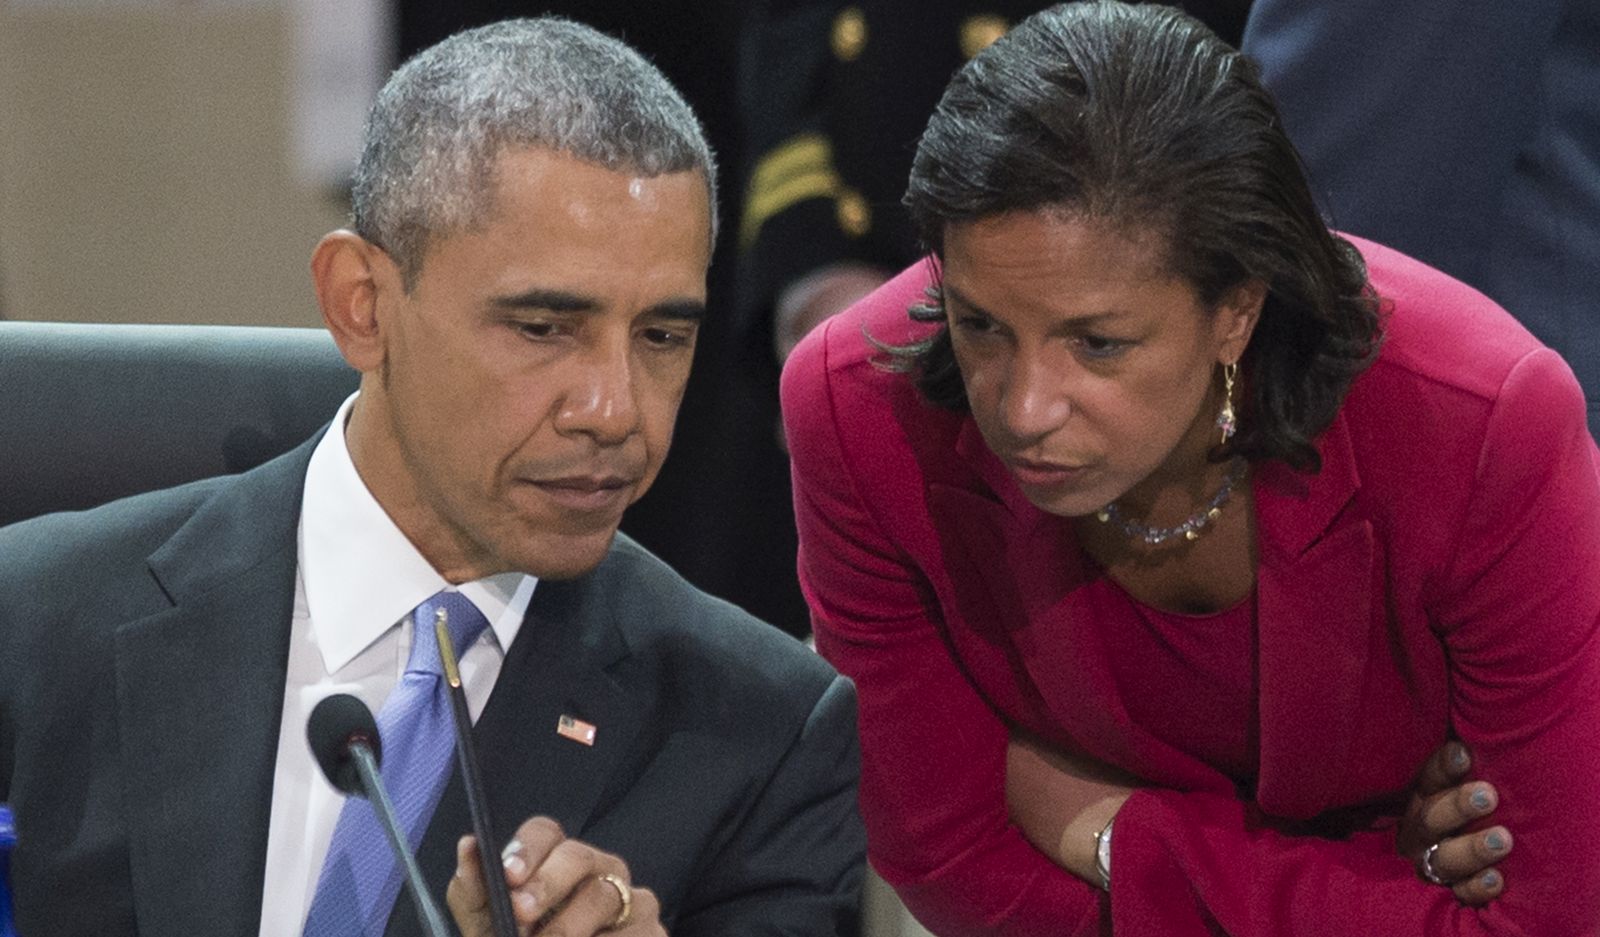 epa08875278 (FILE) - US President Barack Obama (L) listens to US National Security Advisor Susan Rice (R), at the closing plenary session of the 2016 Nuclear Security Summit at the Washington Convention Center in Washington, DC, USA, 01 April 2016 (Reissued 10 December 2020). President-elect Joe Biden chose Susan Rice to head the the White House Domestic Policy Council.  EPA/MICHAEL REYNOLDS *** Local Caption *** 52679121